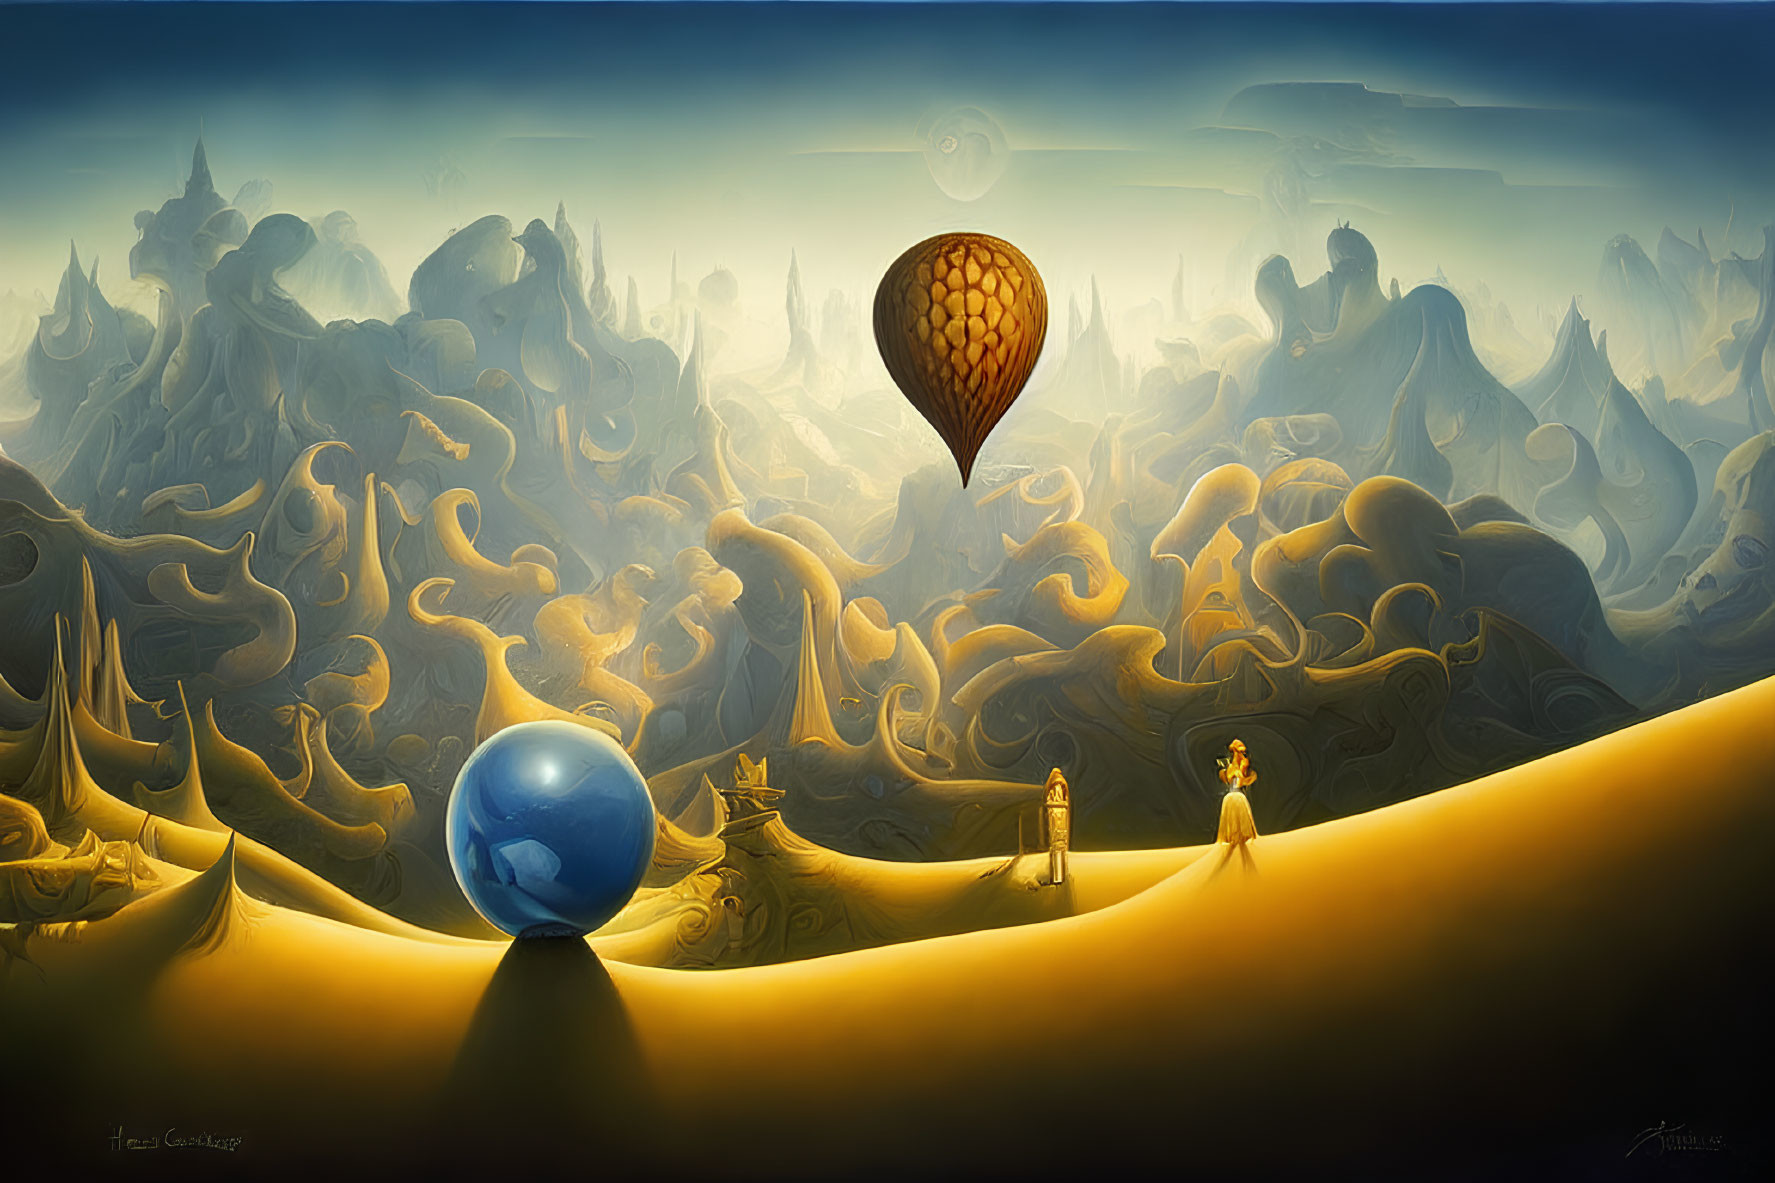 Surreal landscape with hot air balloon, glossy sphere, and figures on golden dune